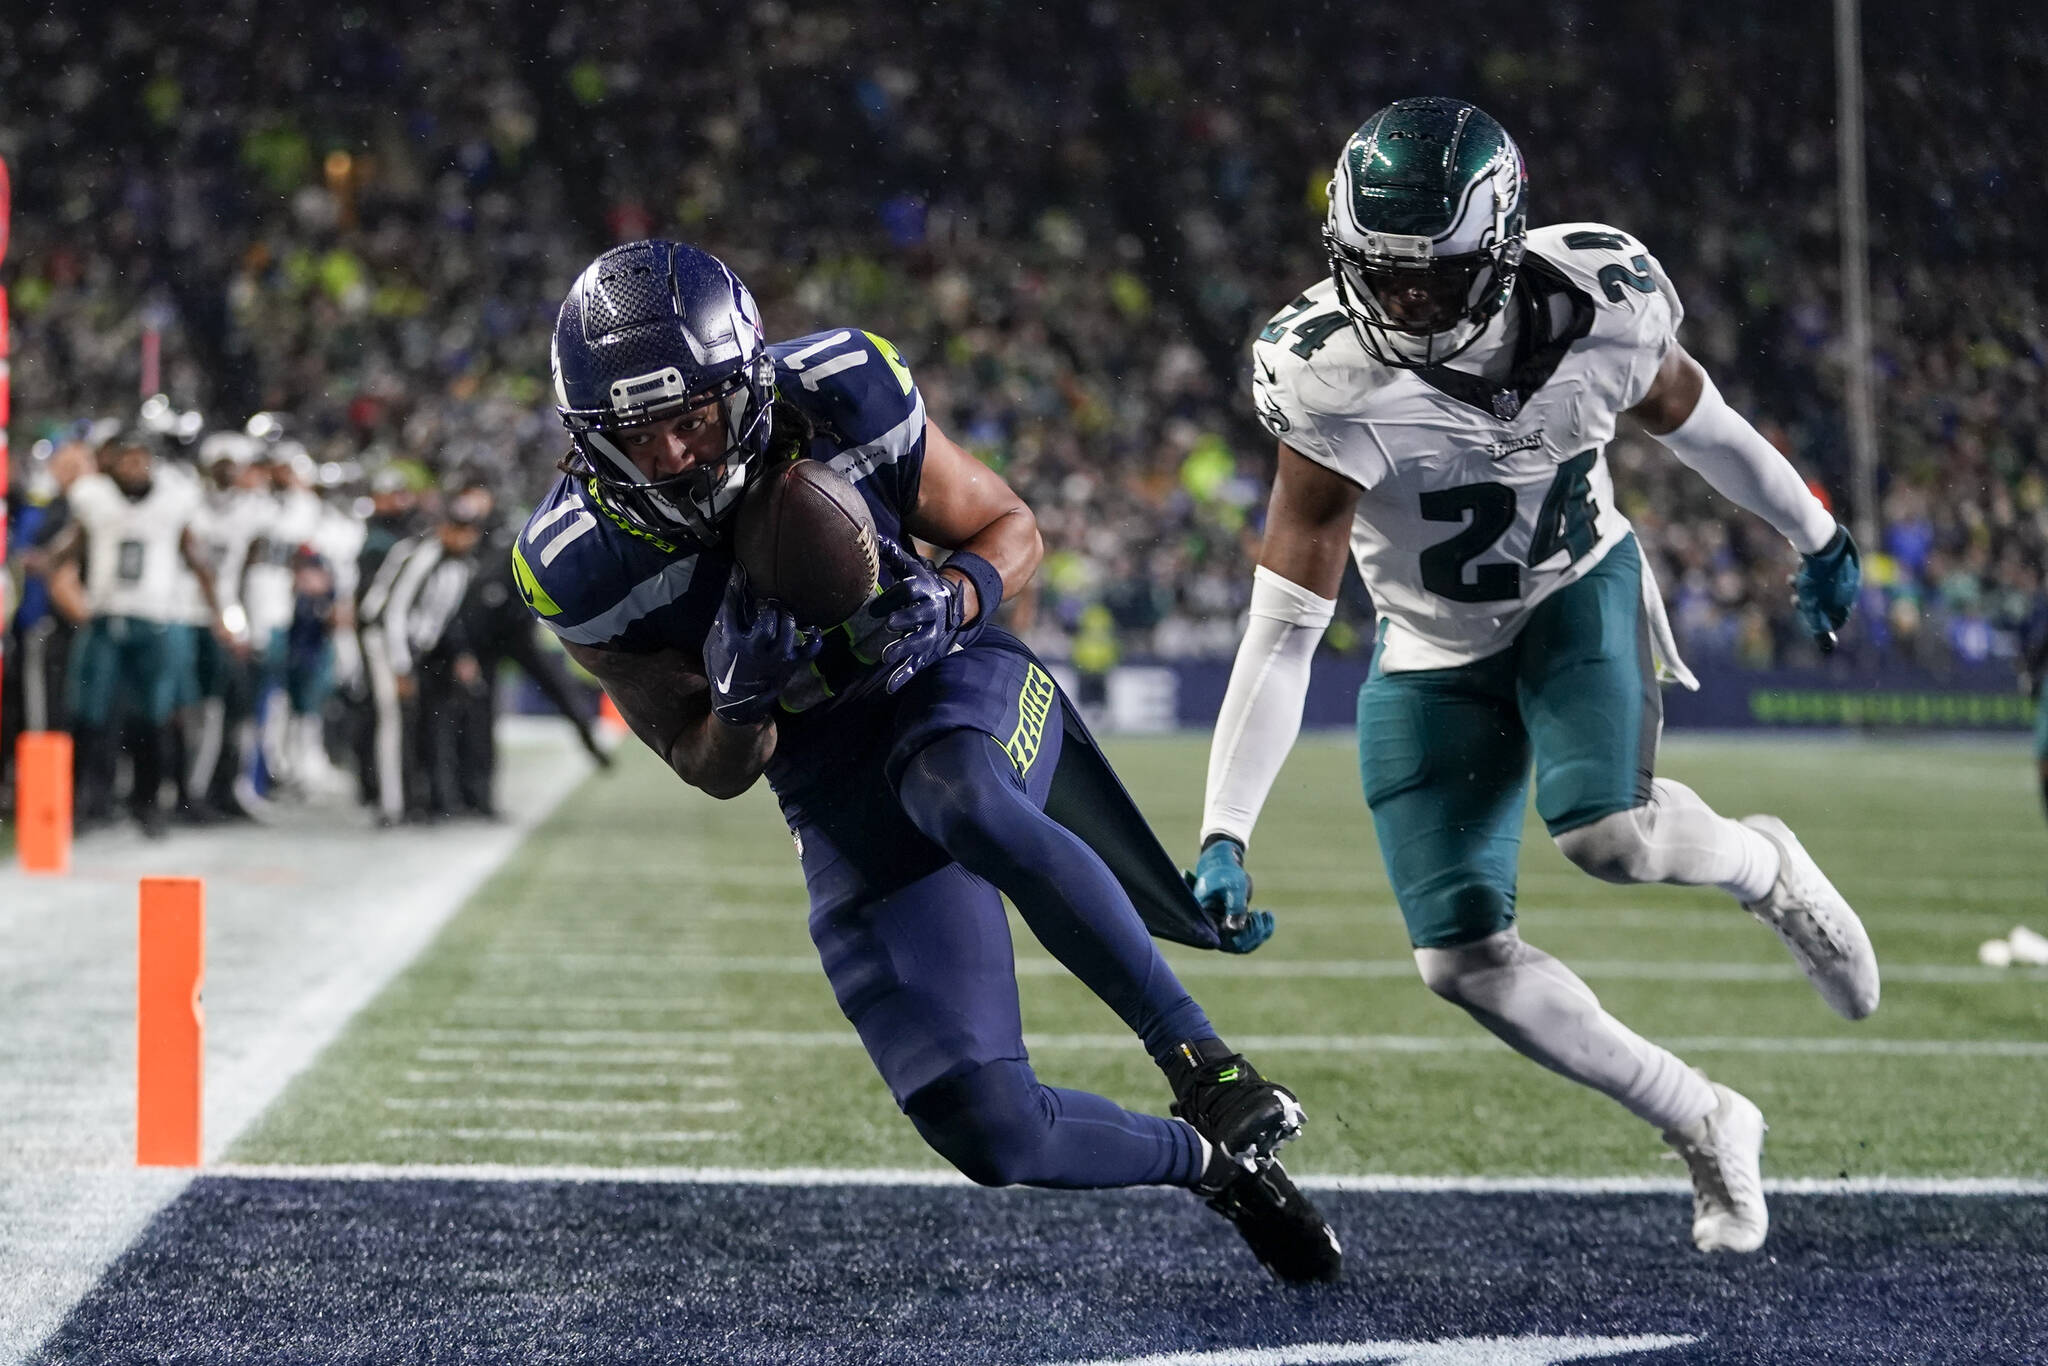 Grading the Seahawks in their 20-17 victory over the Eagles